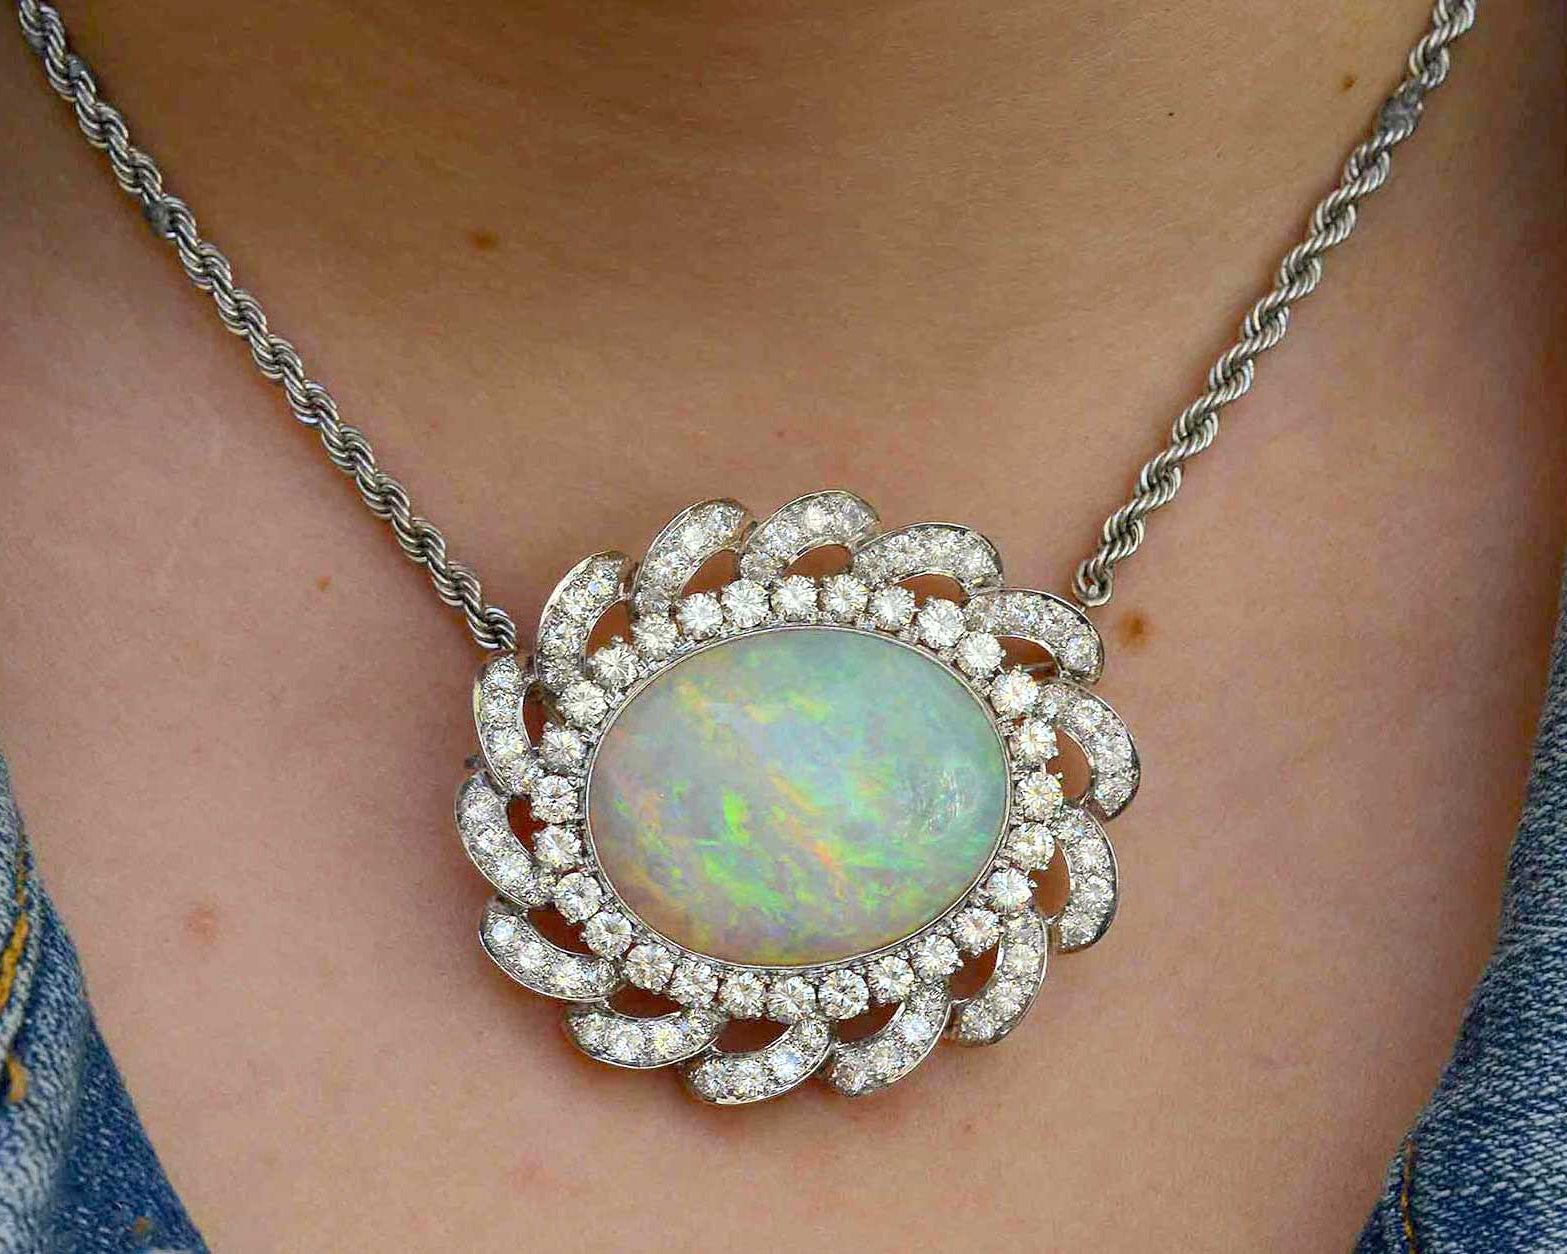 This cabochon oval opal is set in a diamond halo statement necklace.